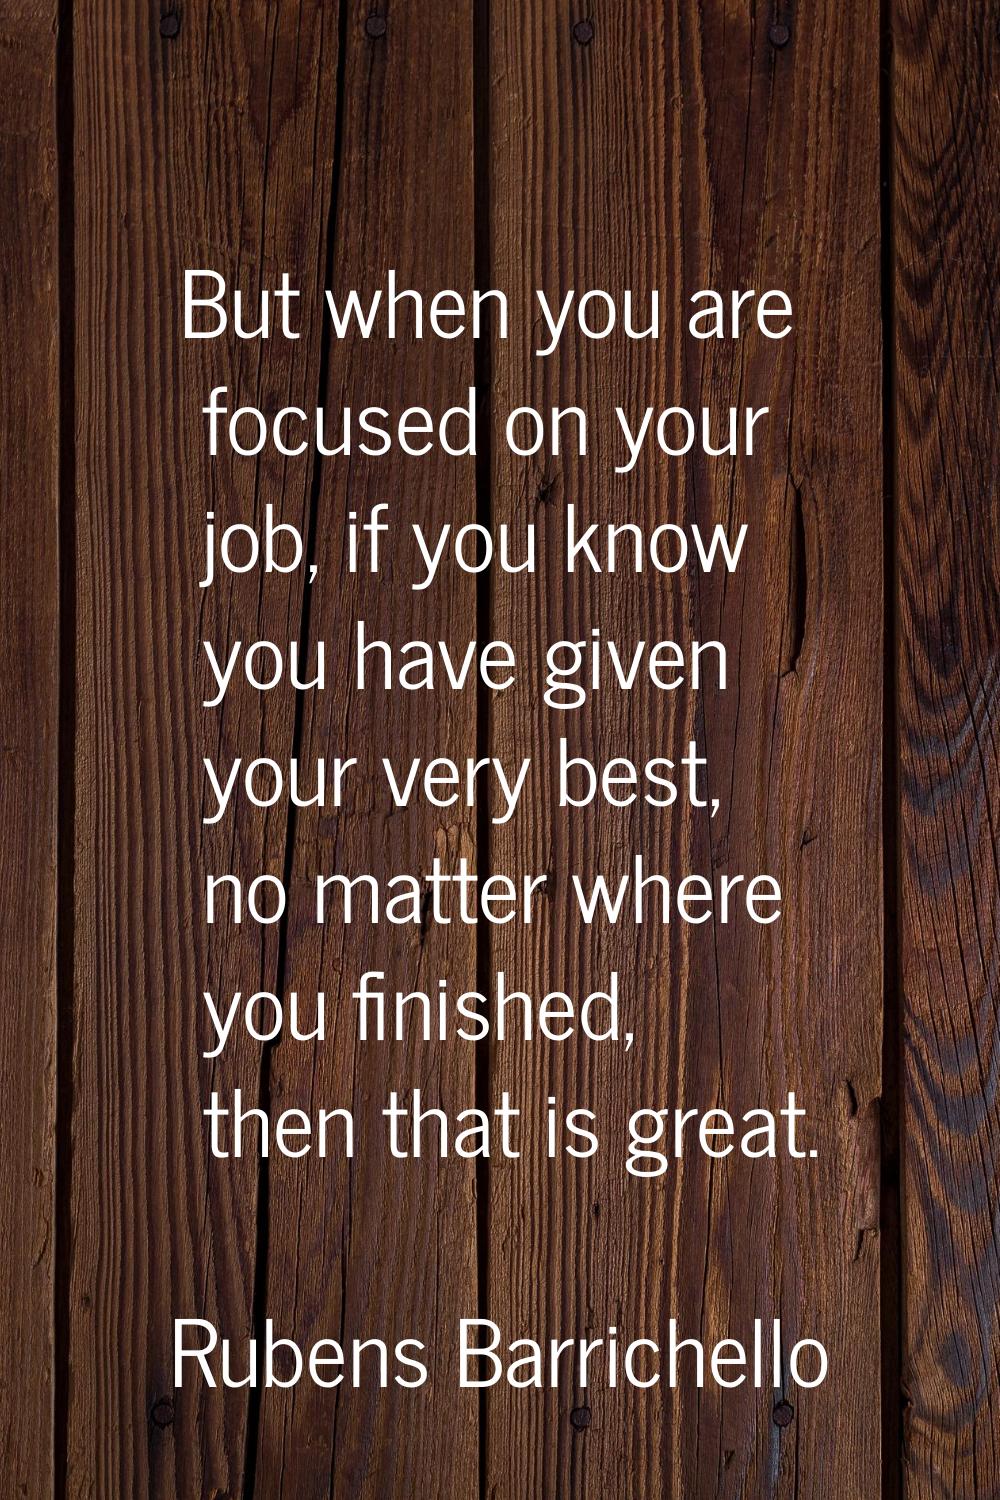 But when you are focused on your job, if you know you have given your very best, no matter where yo